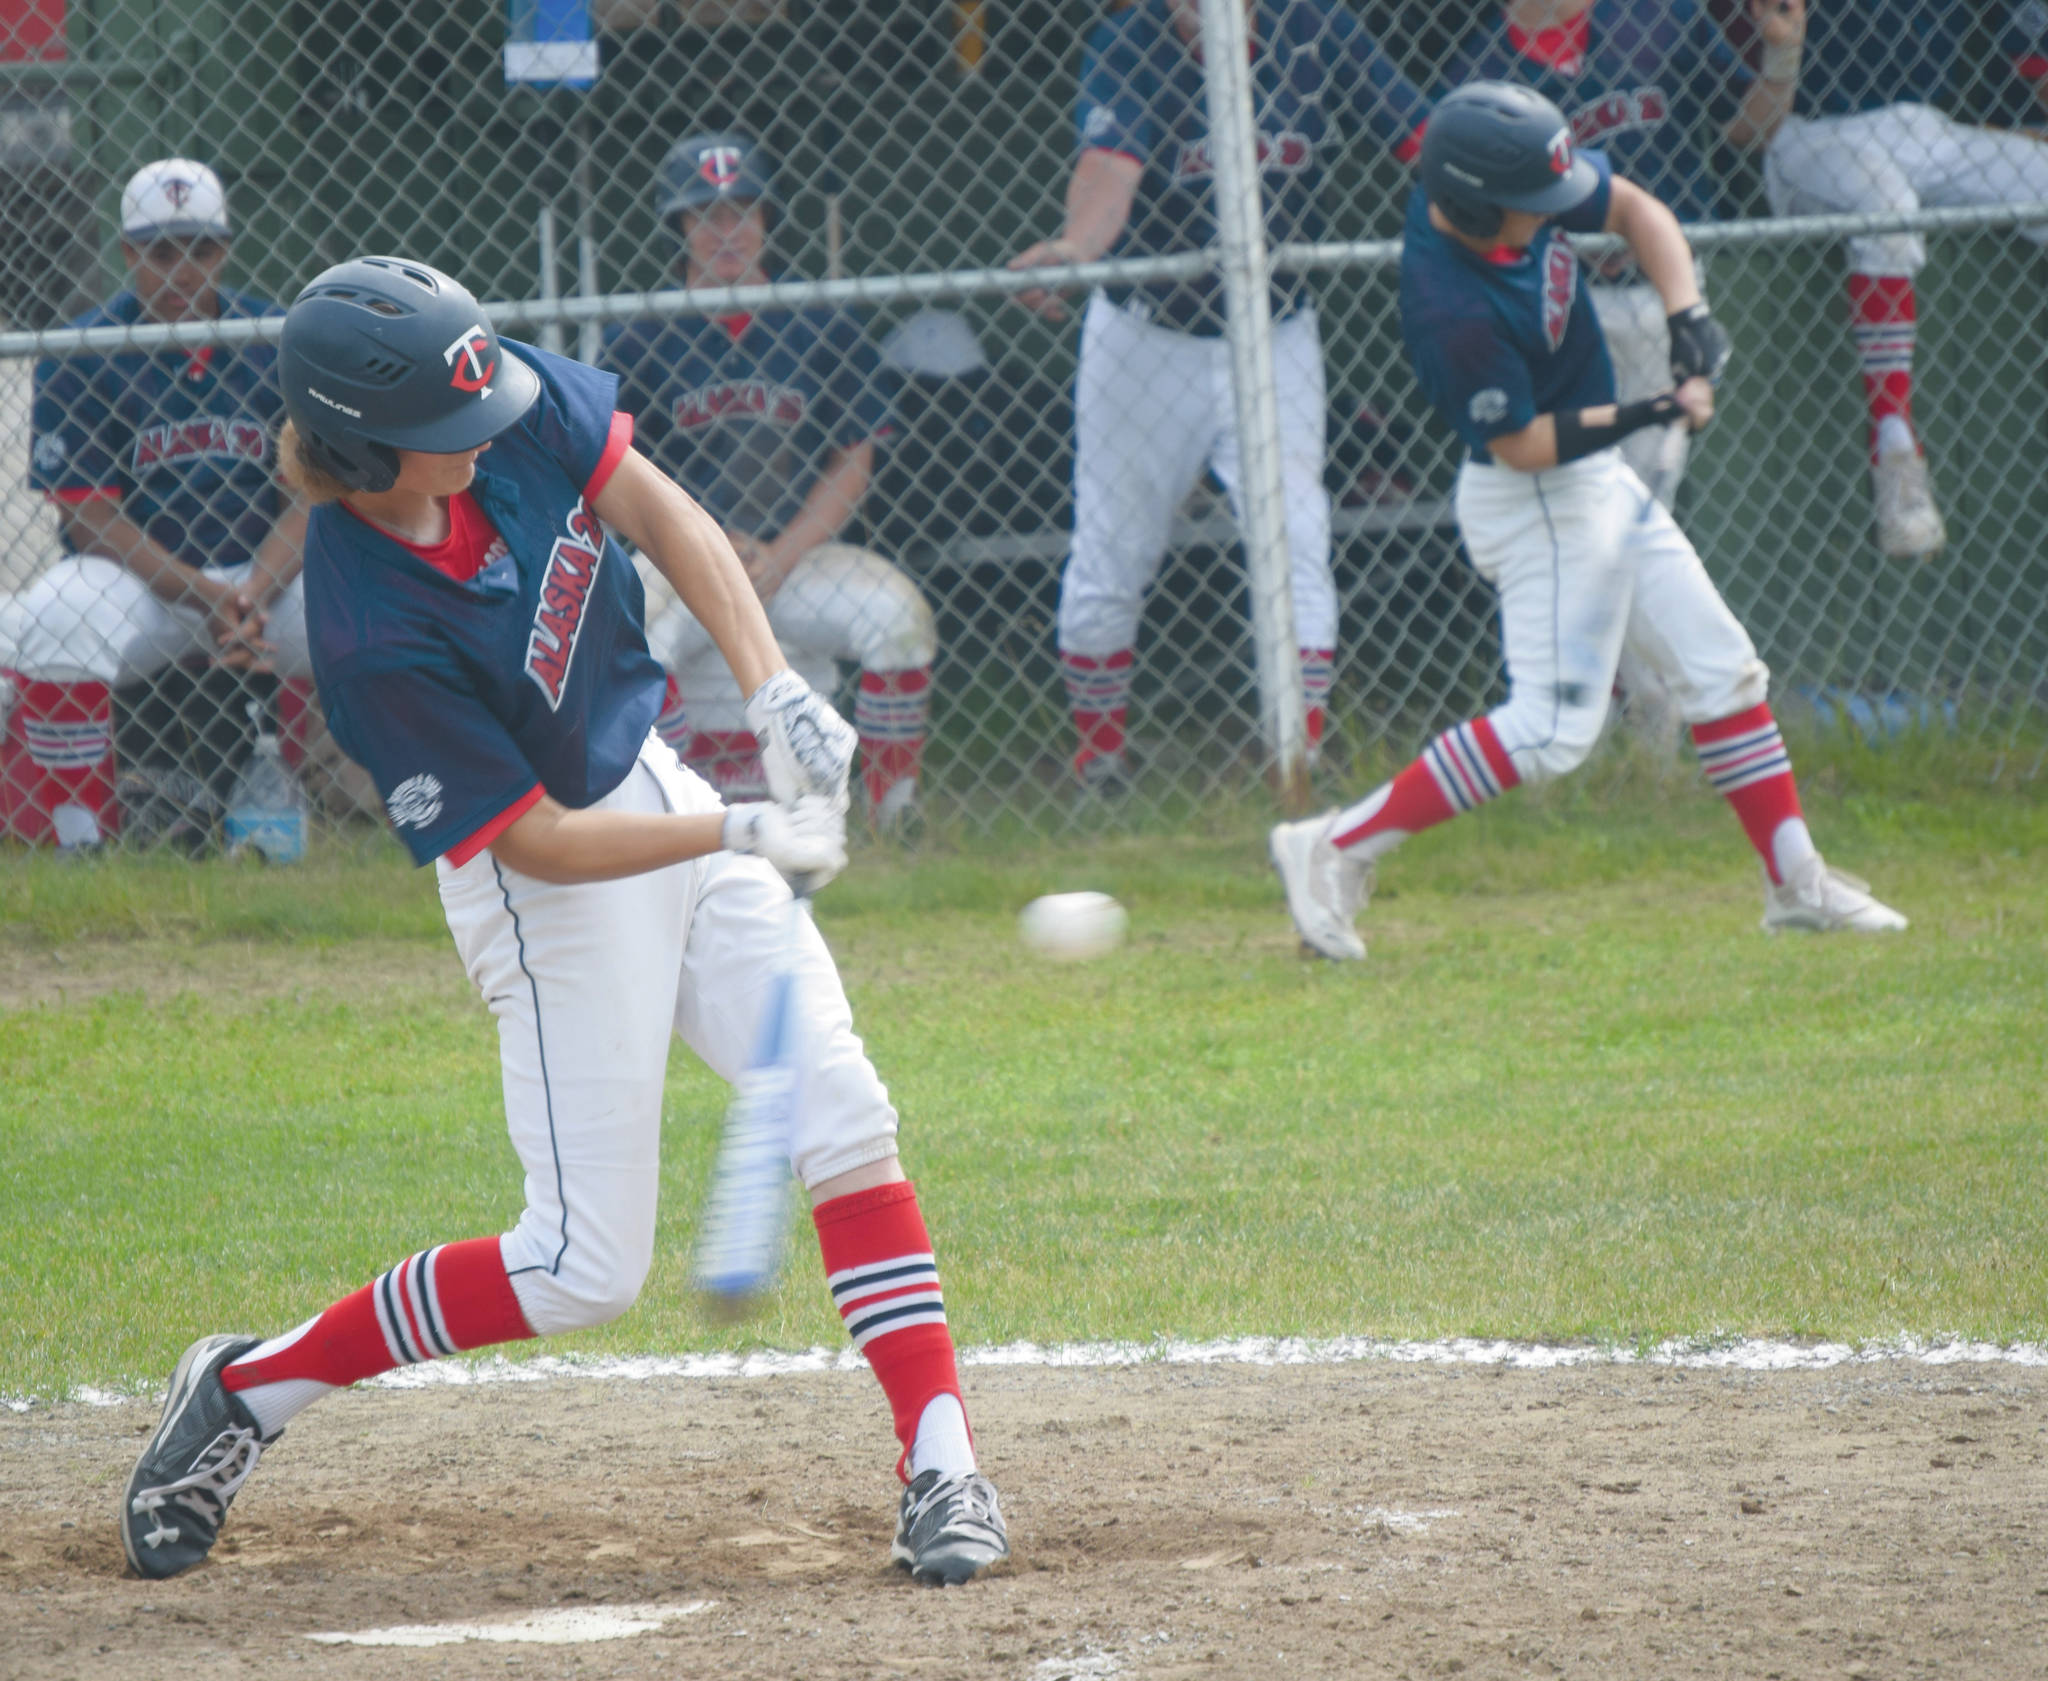 Alaska 20’s Davey Belger fouls off a pitch against Eagle River while Harrison Metz times up the pitcher in the on-deck circle Tuesday, July 7, 2020, at the Kenai Little League fields in Kenai, Alaska. (Photo by Jeff Helminiak/Peninsula Clarion)